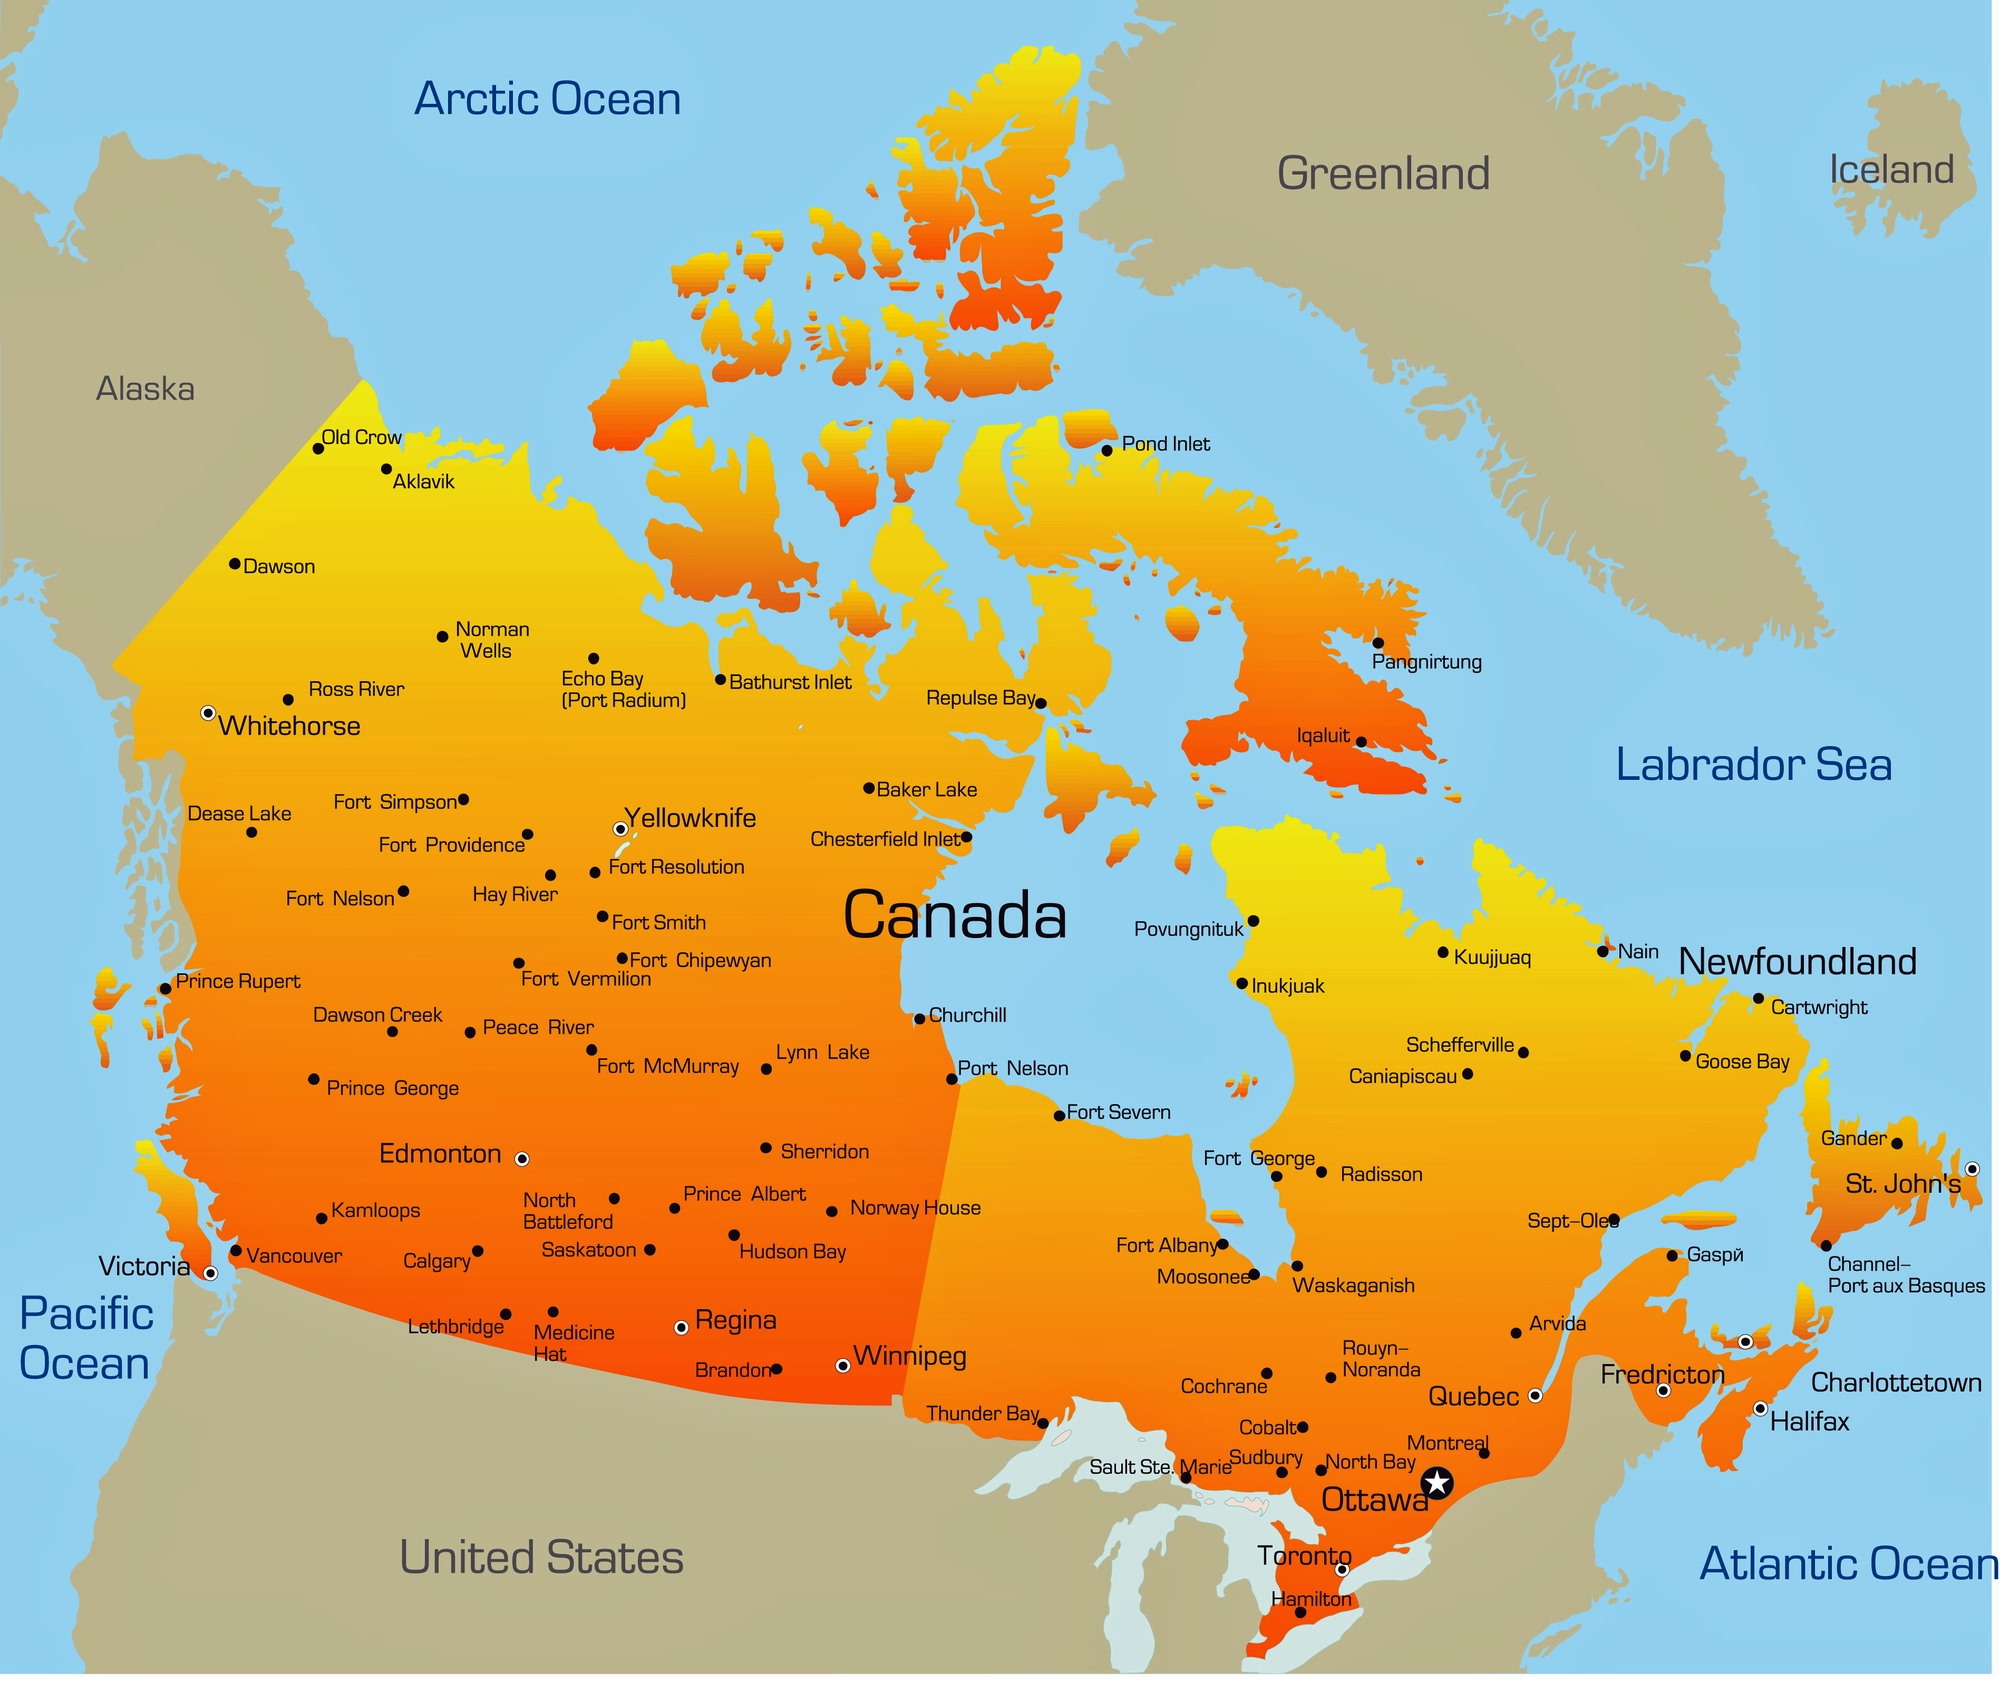 map of canada with cities